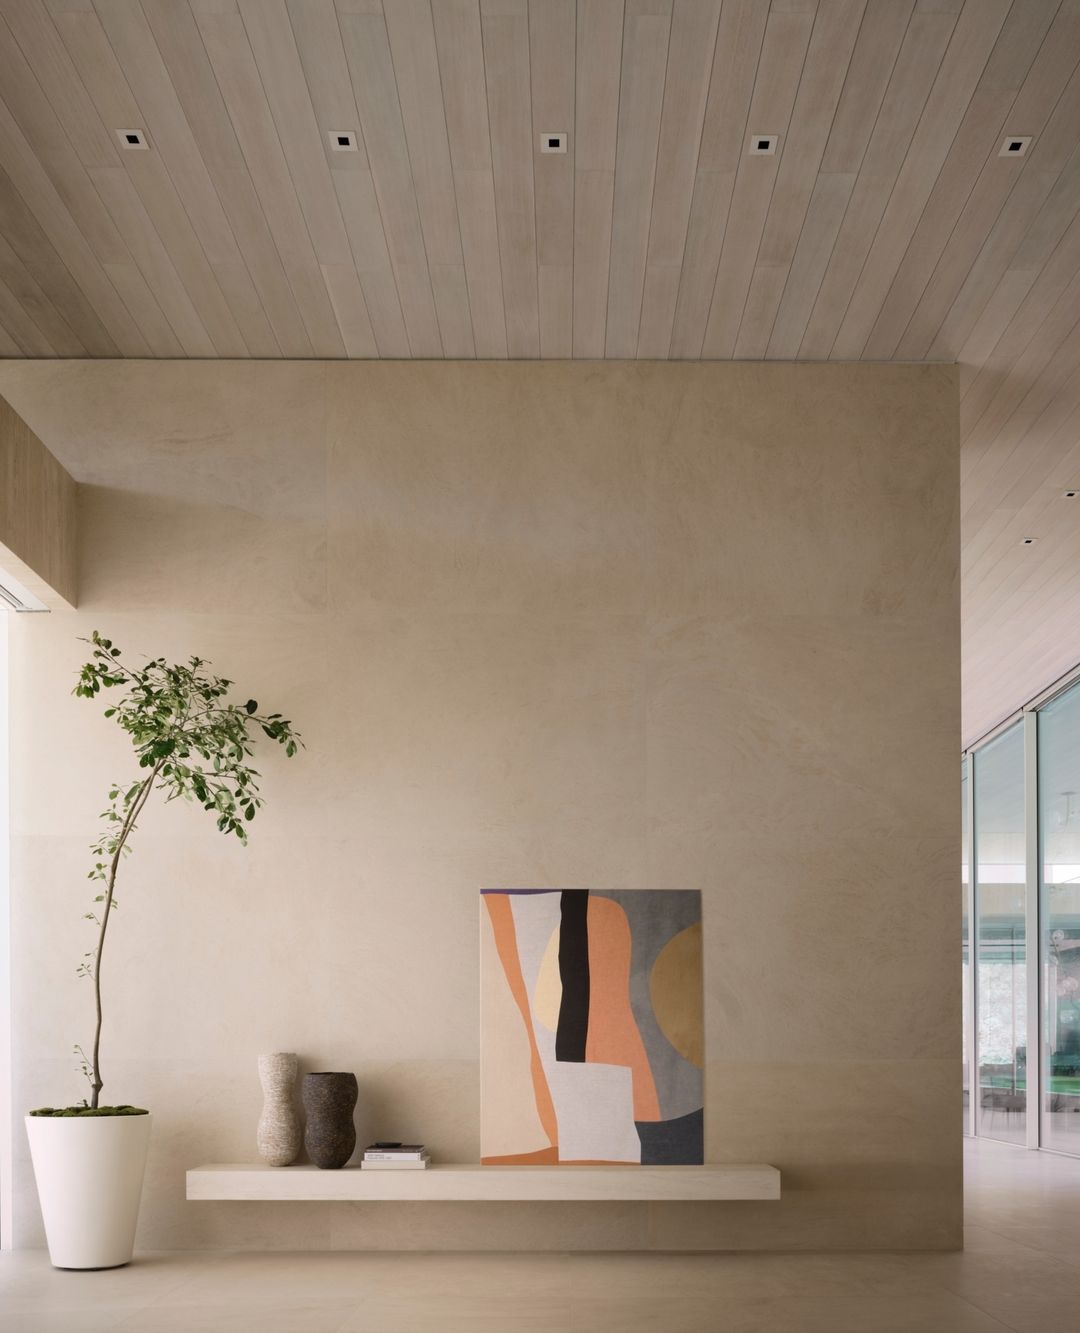 Entrawat with art painting and neutral colors wall